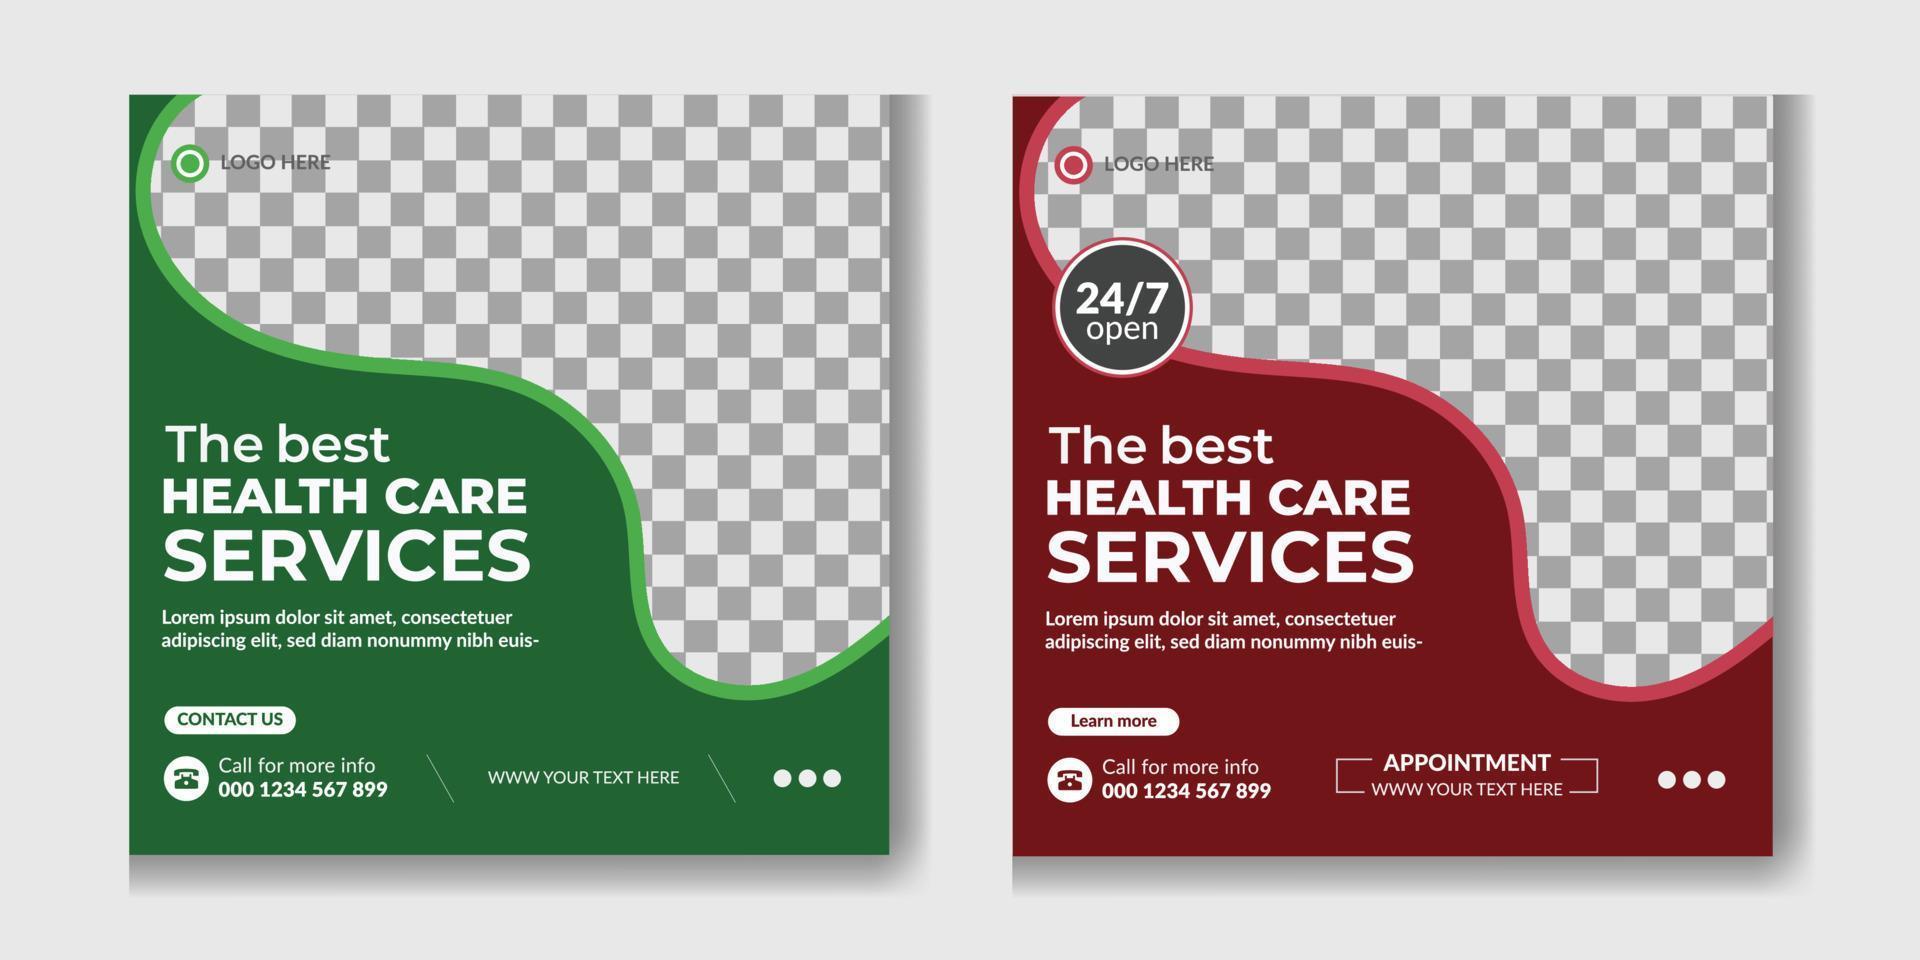 Medical and health care services social media post template design collection free Vector